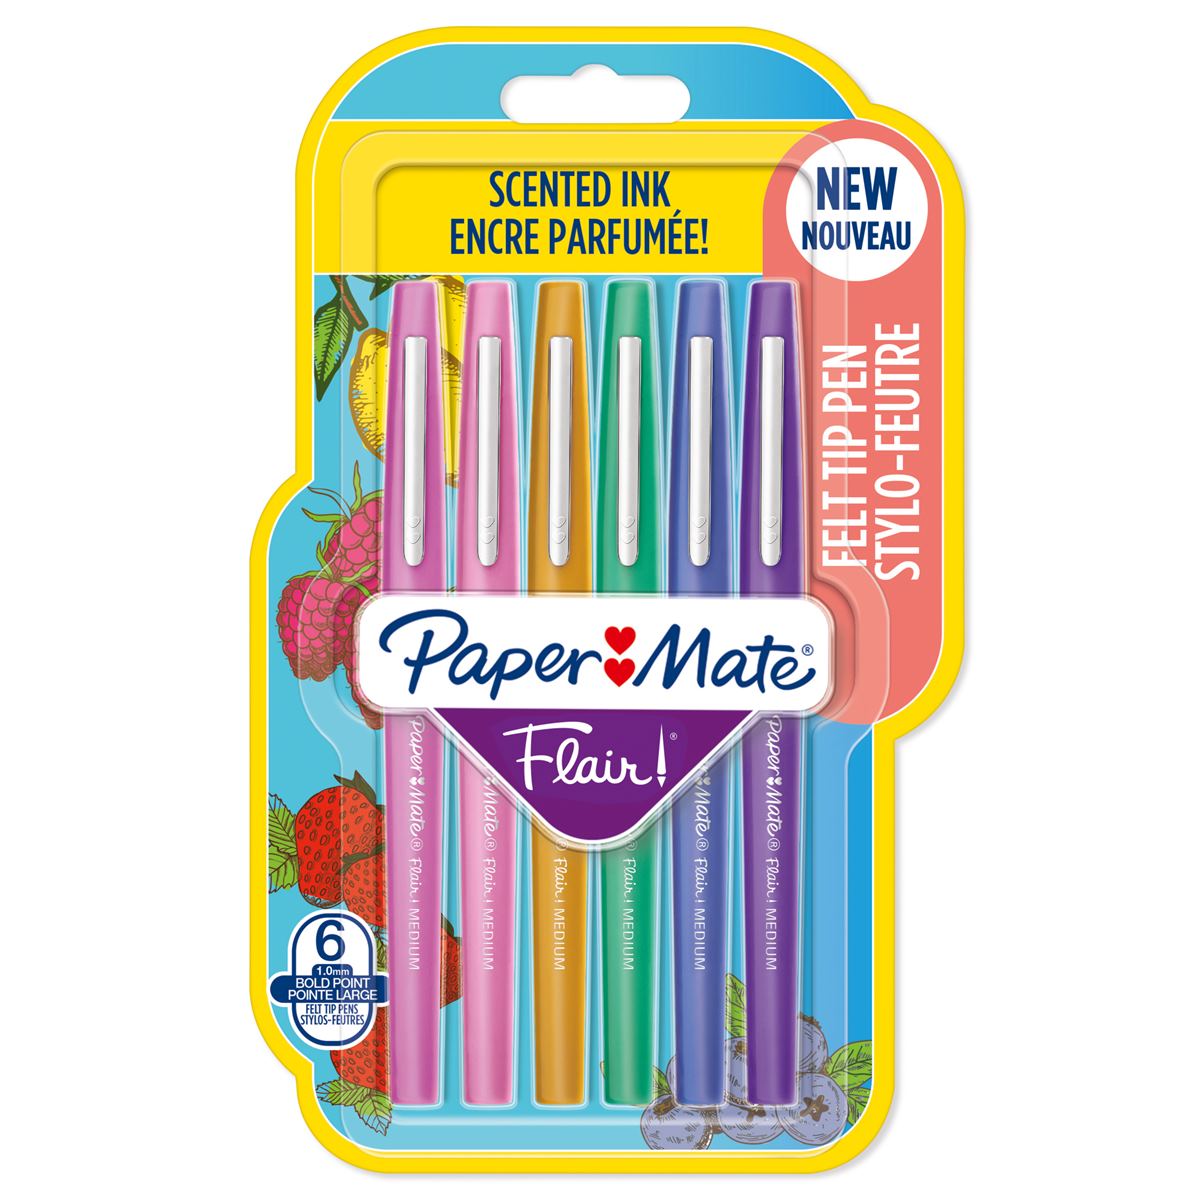 Paper Mate Flair Scented Felt Tip Pens - Pack of 6